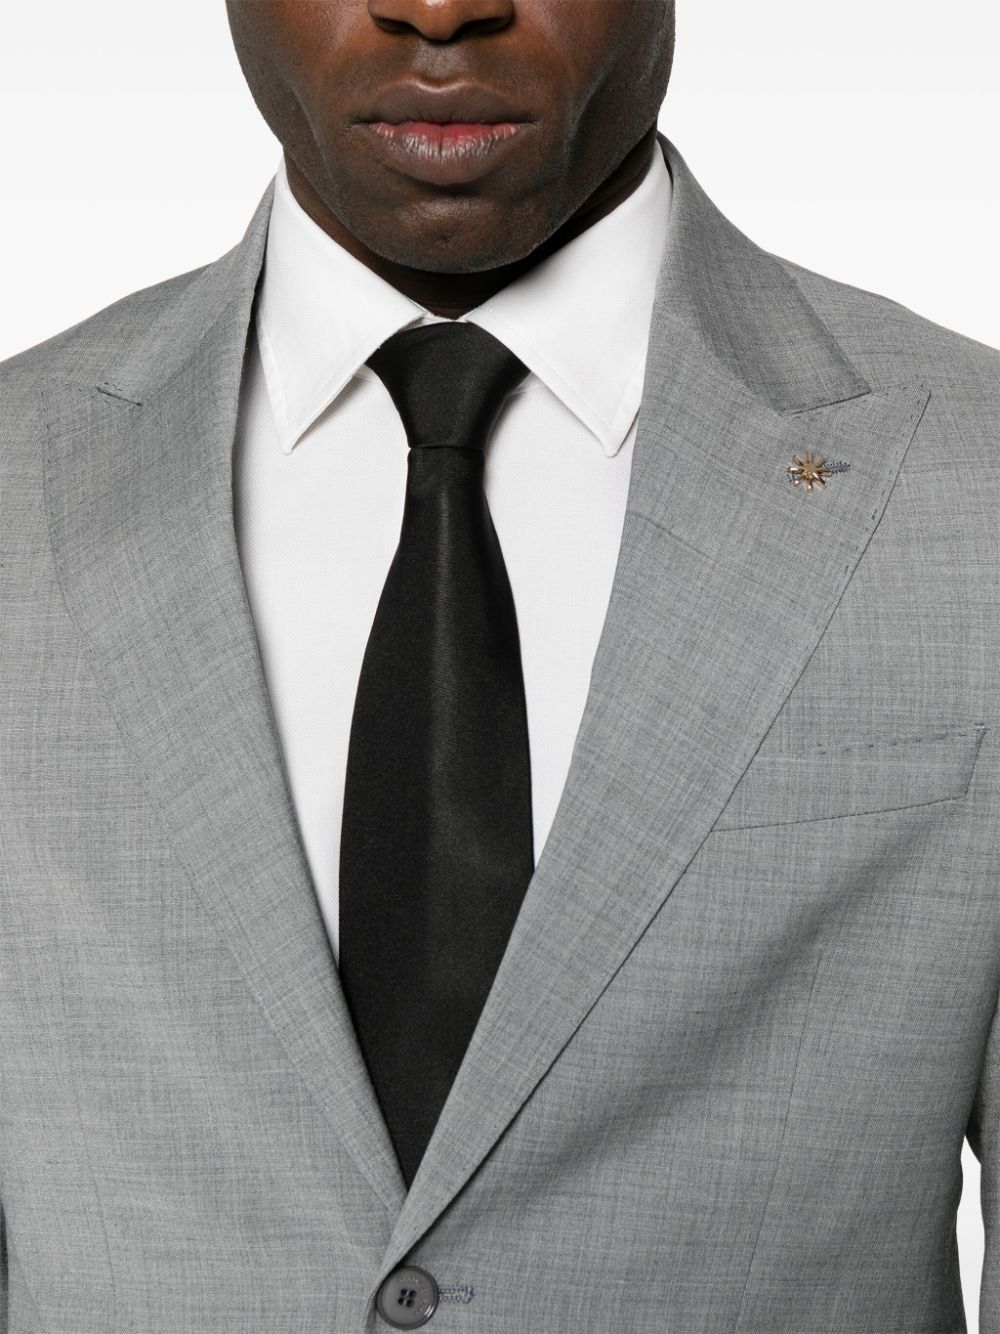 Gray single-breasted suit